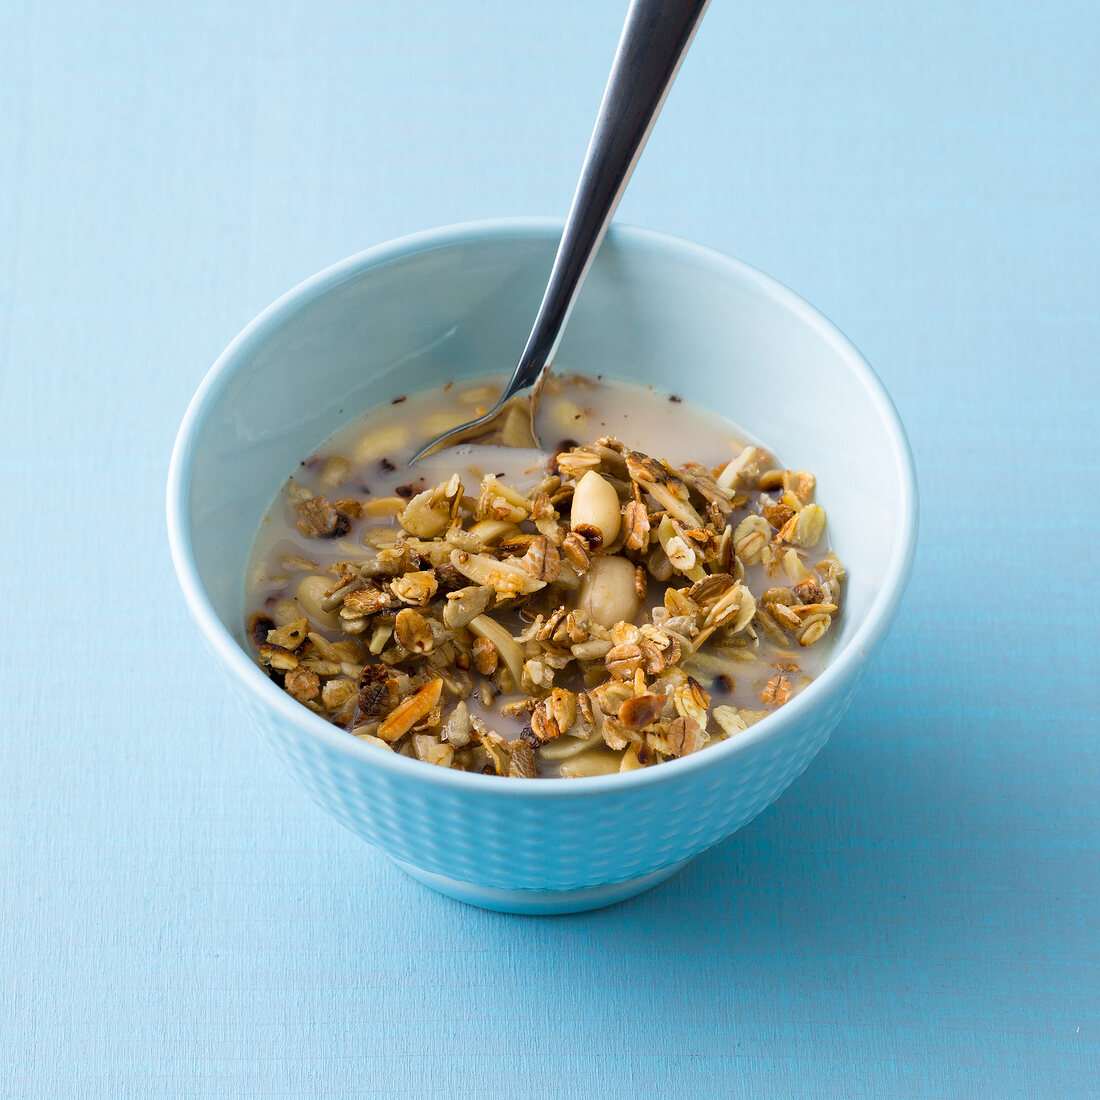 Rostmusli with nuts in bowl